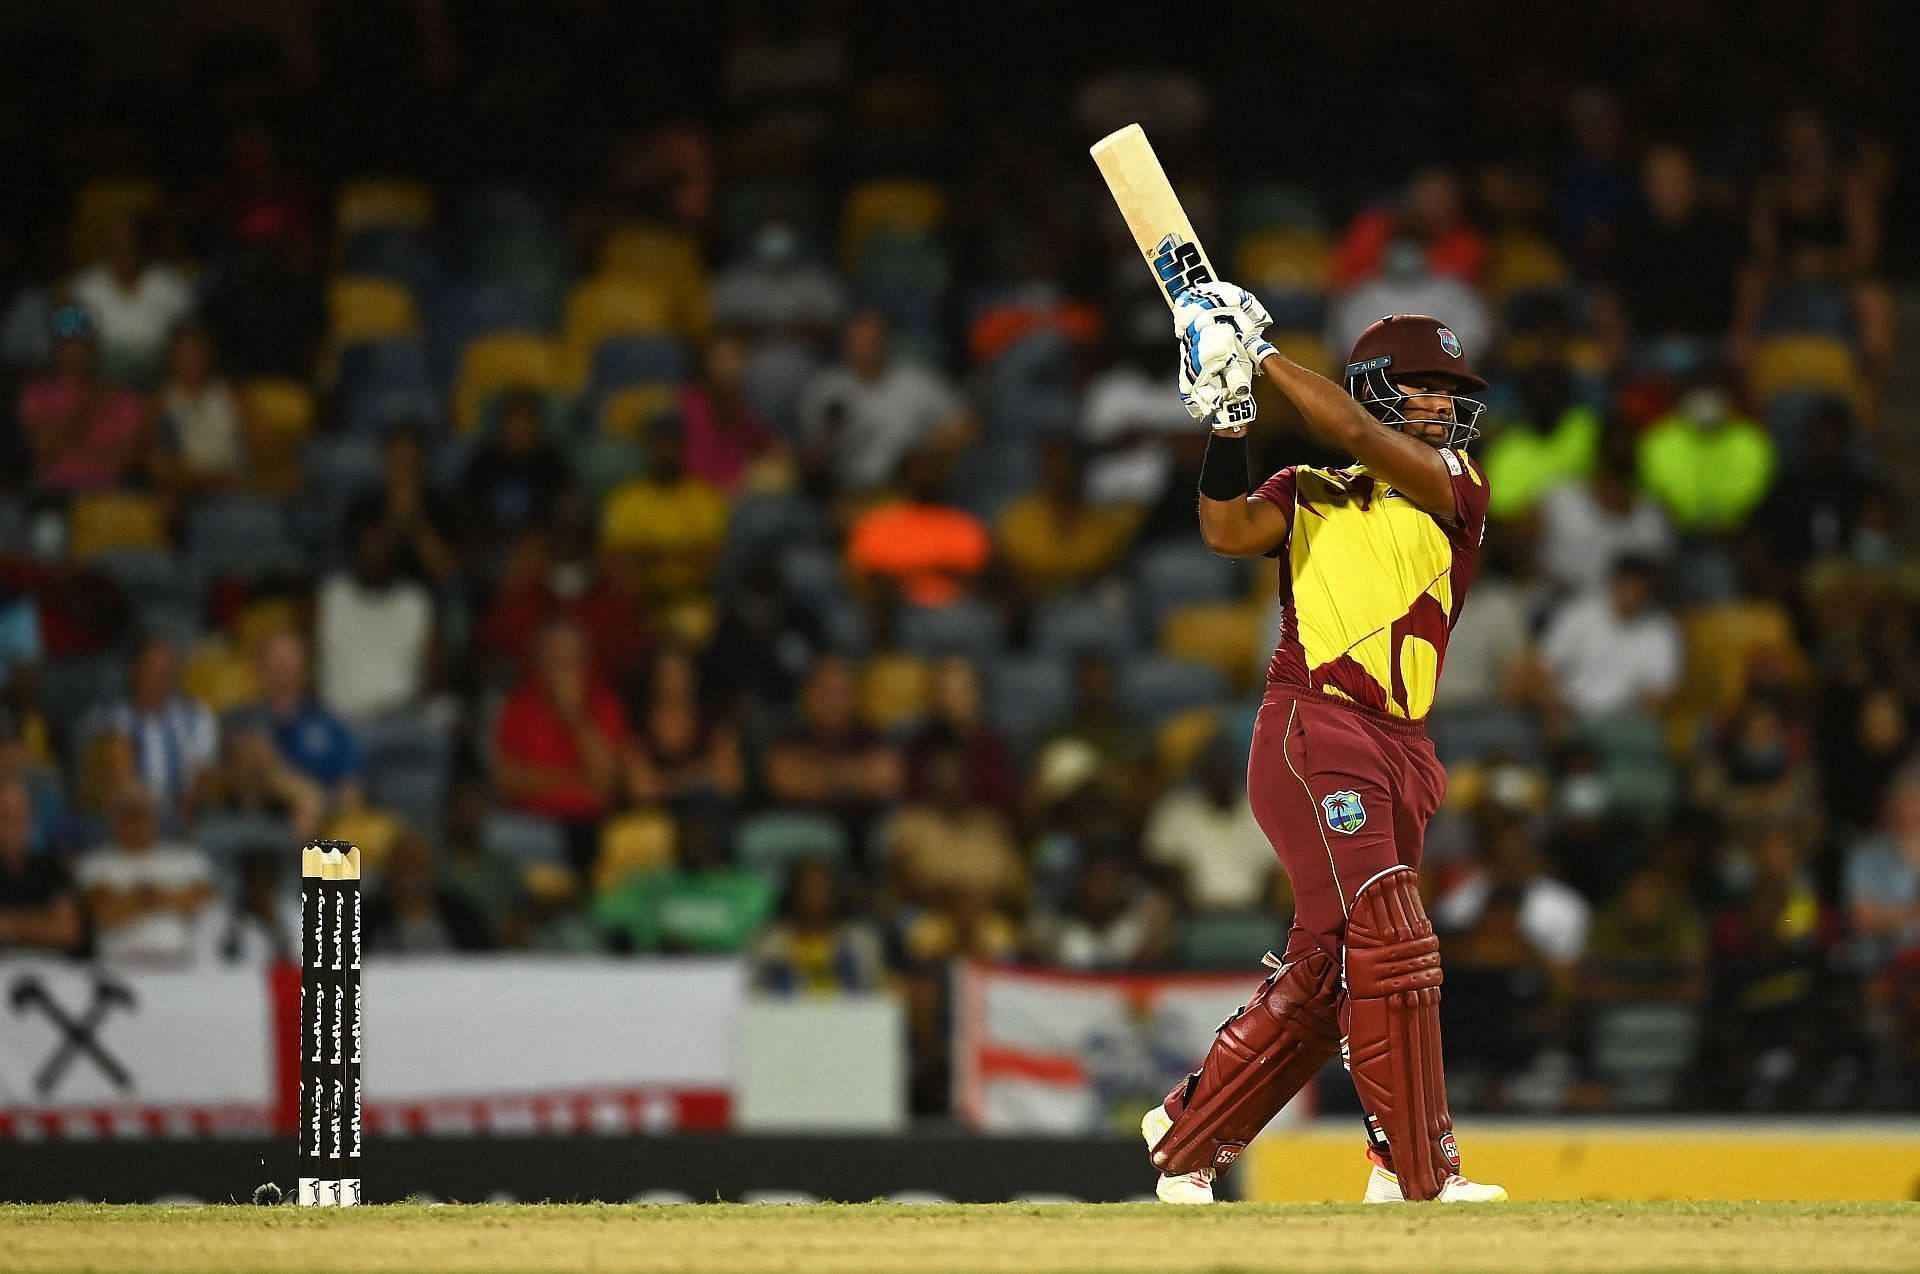 All eyes will be on the swashbuckling Nicholas Pooran.